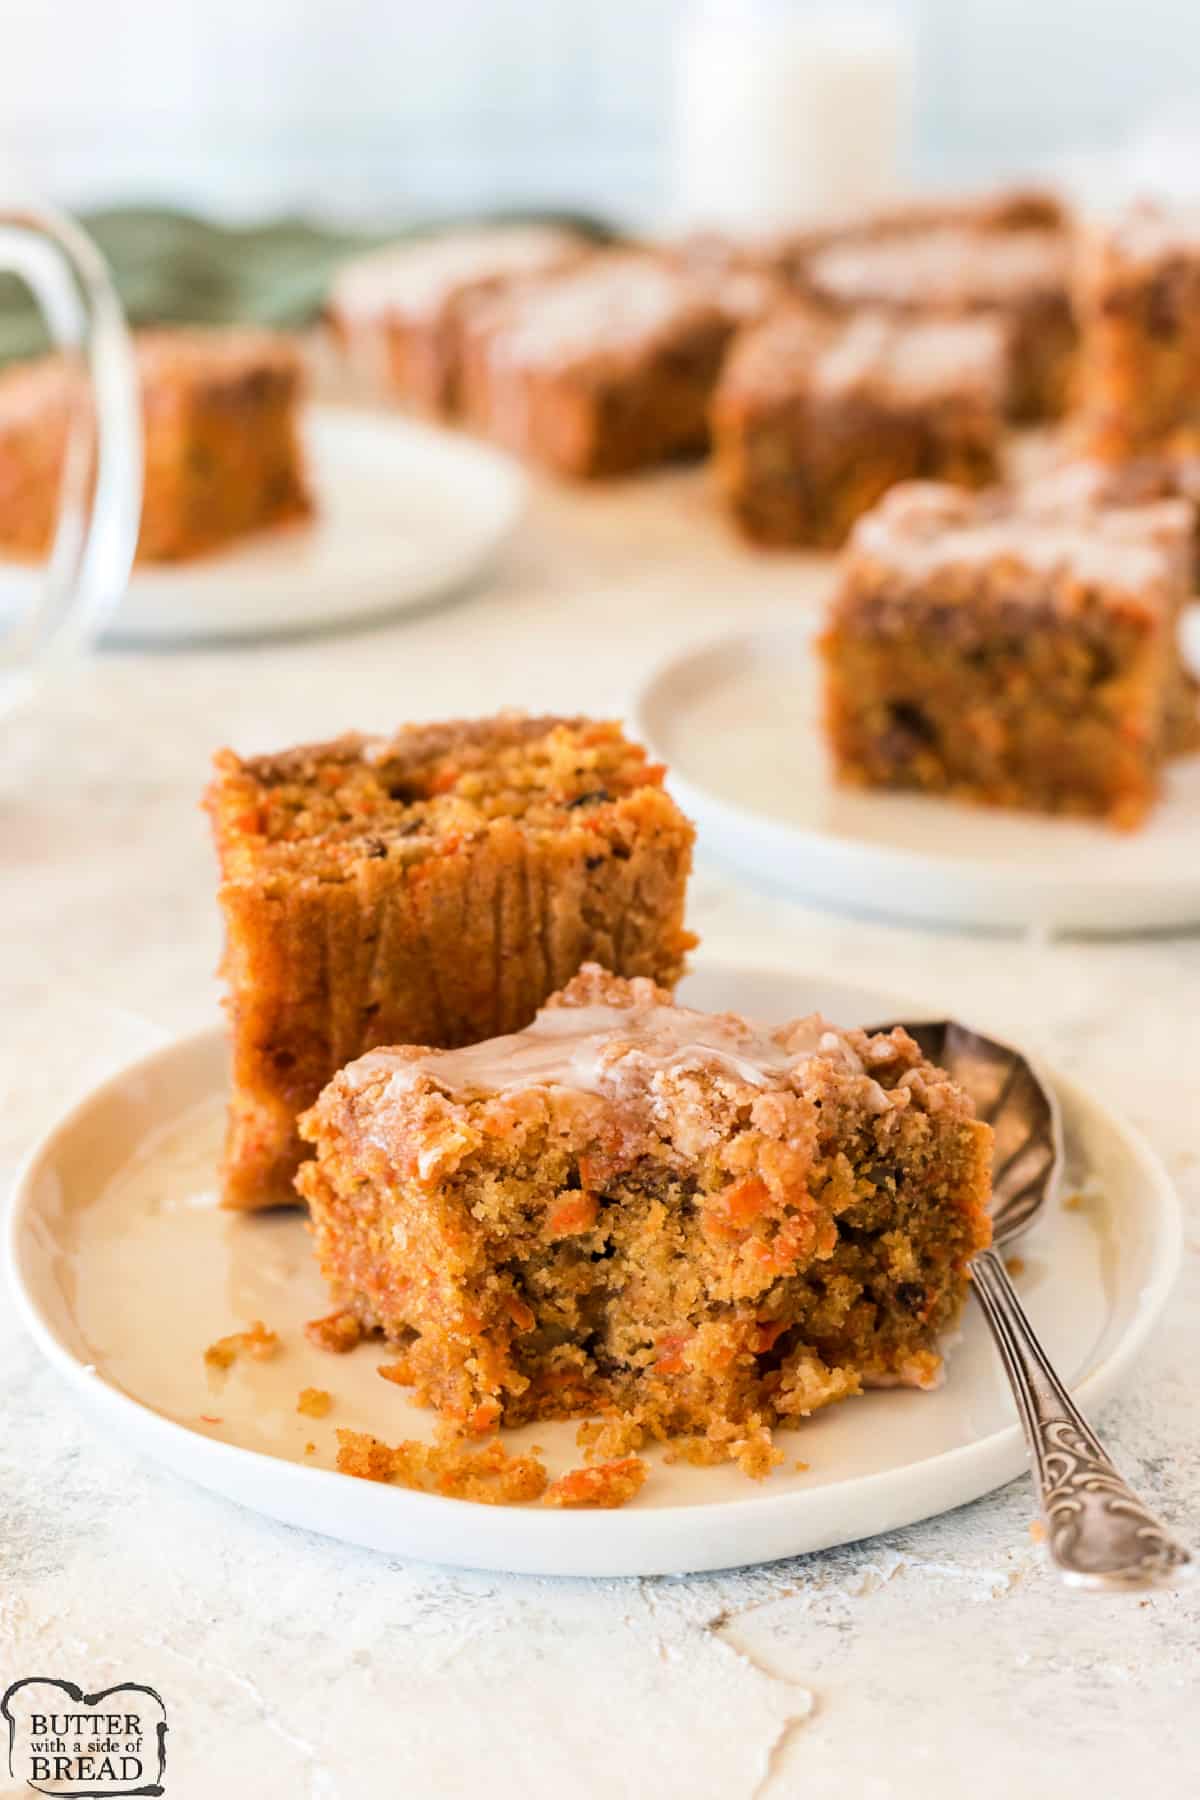 Coffee cake made with walnuts and shredded carrots